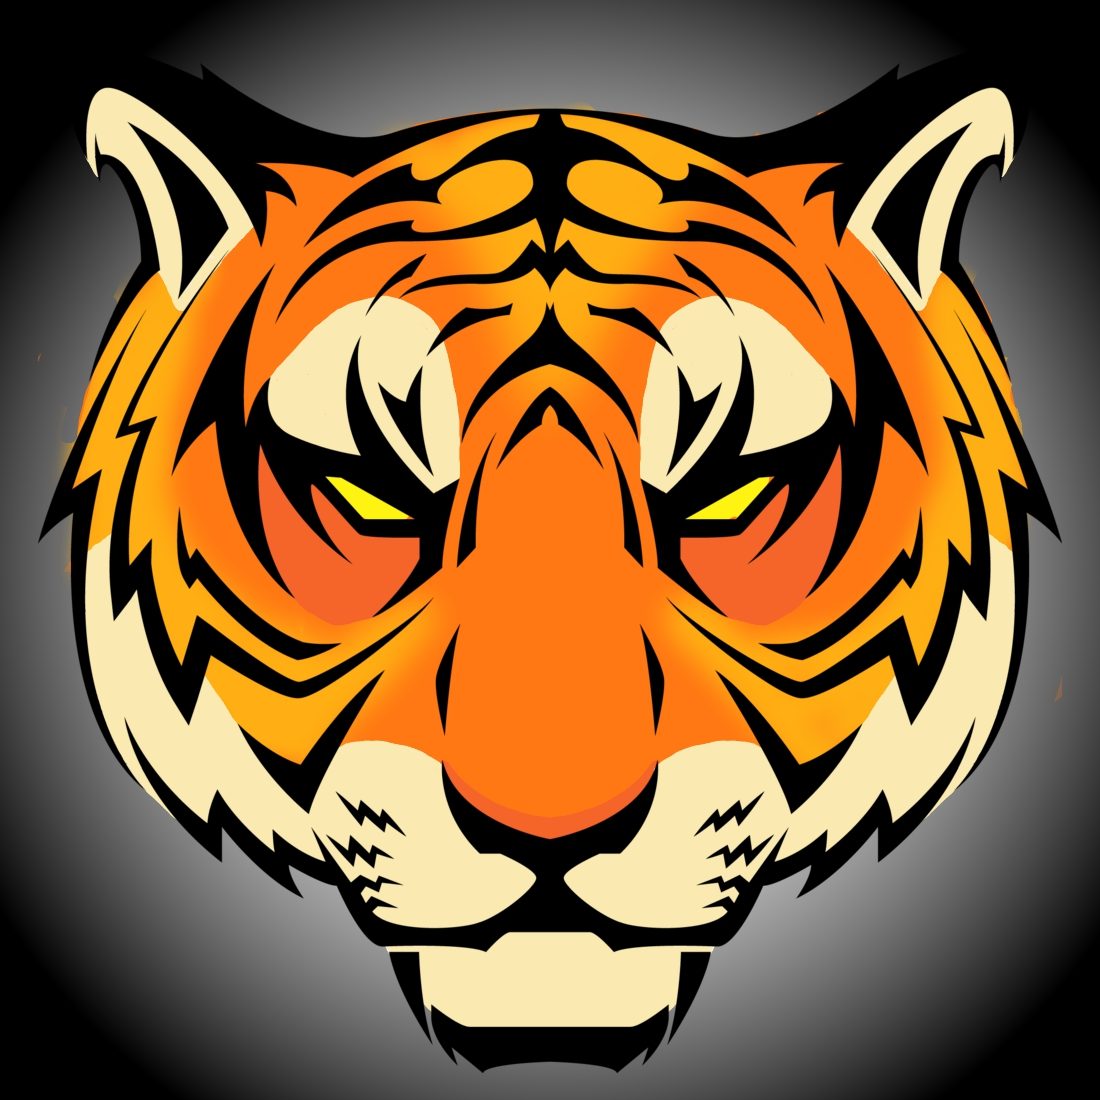 Tiger Cubs Migrate into Herrin High